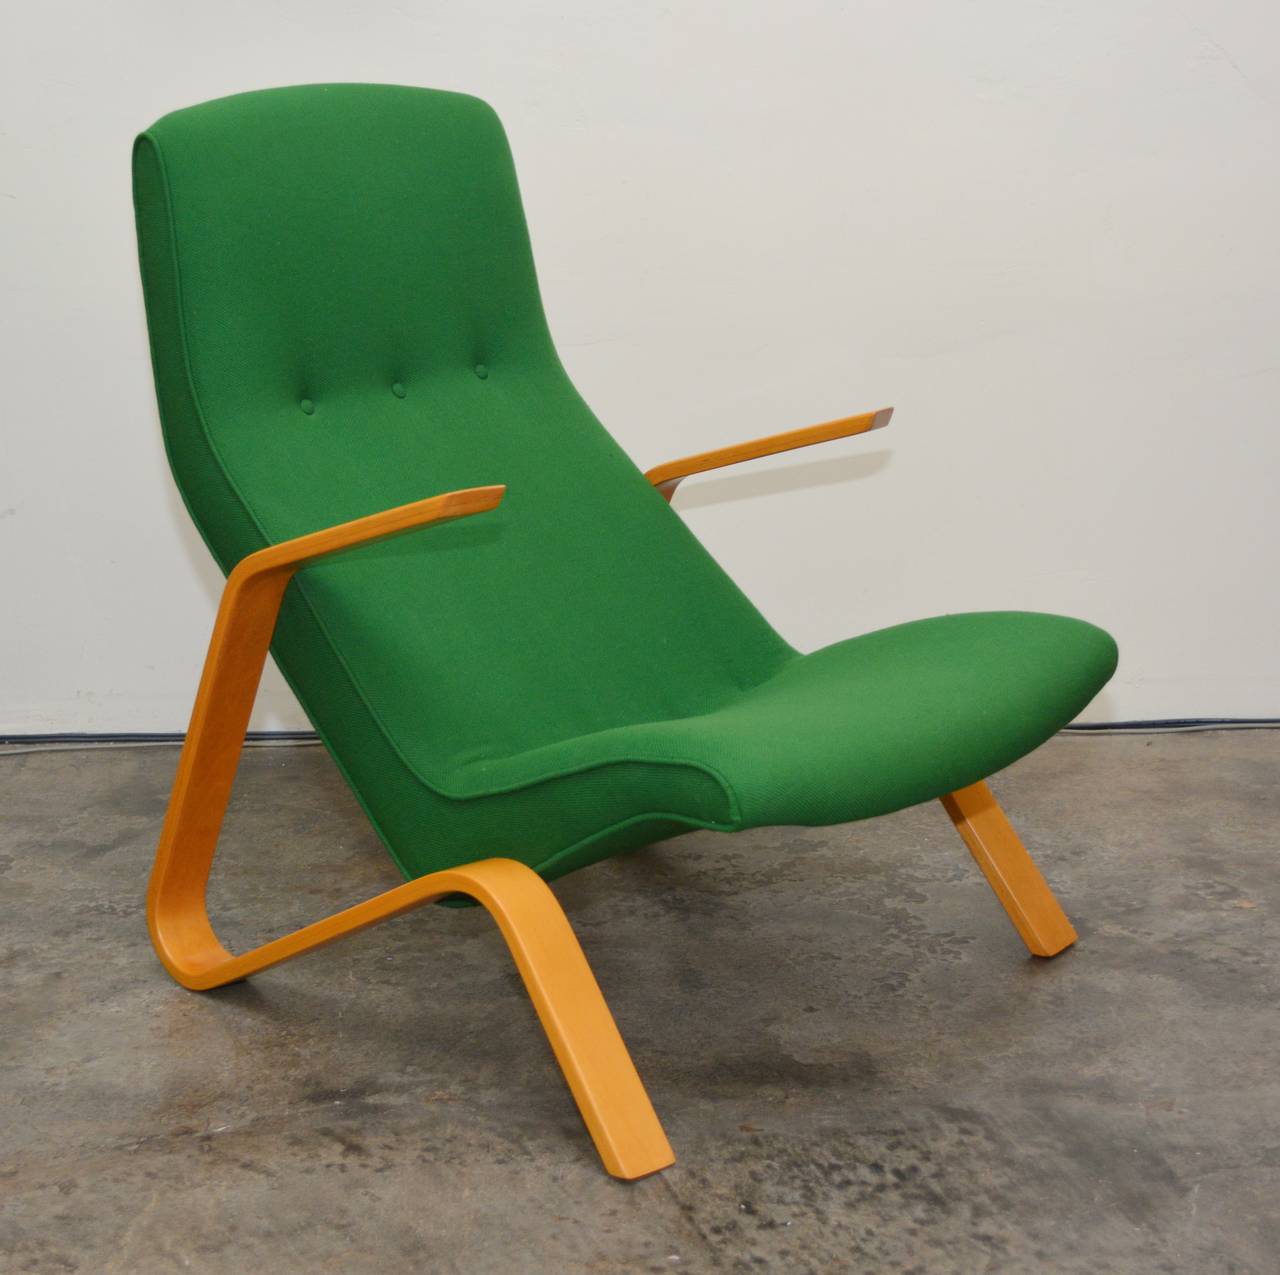 Knoll grasshopper chair designed by Eero Saarinen. This chair has an older restoration. The wood is in good shape and only shows light wear. There is a chip repair on one arm. The hopsack fabric has some snags, a couple of light spots and two small